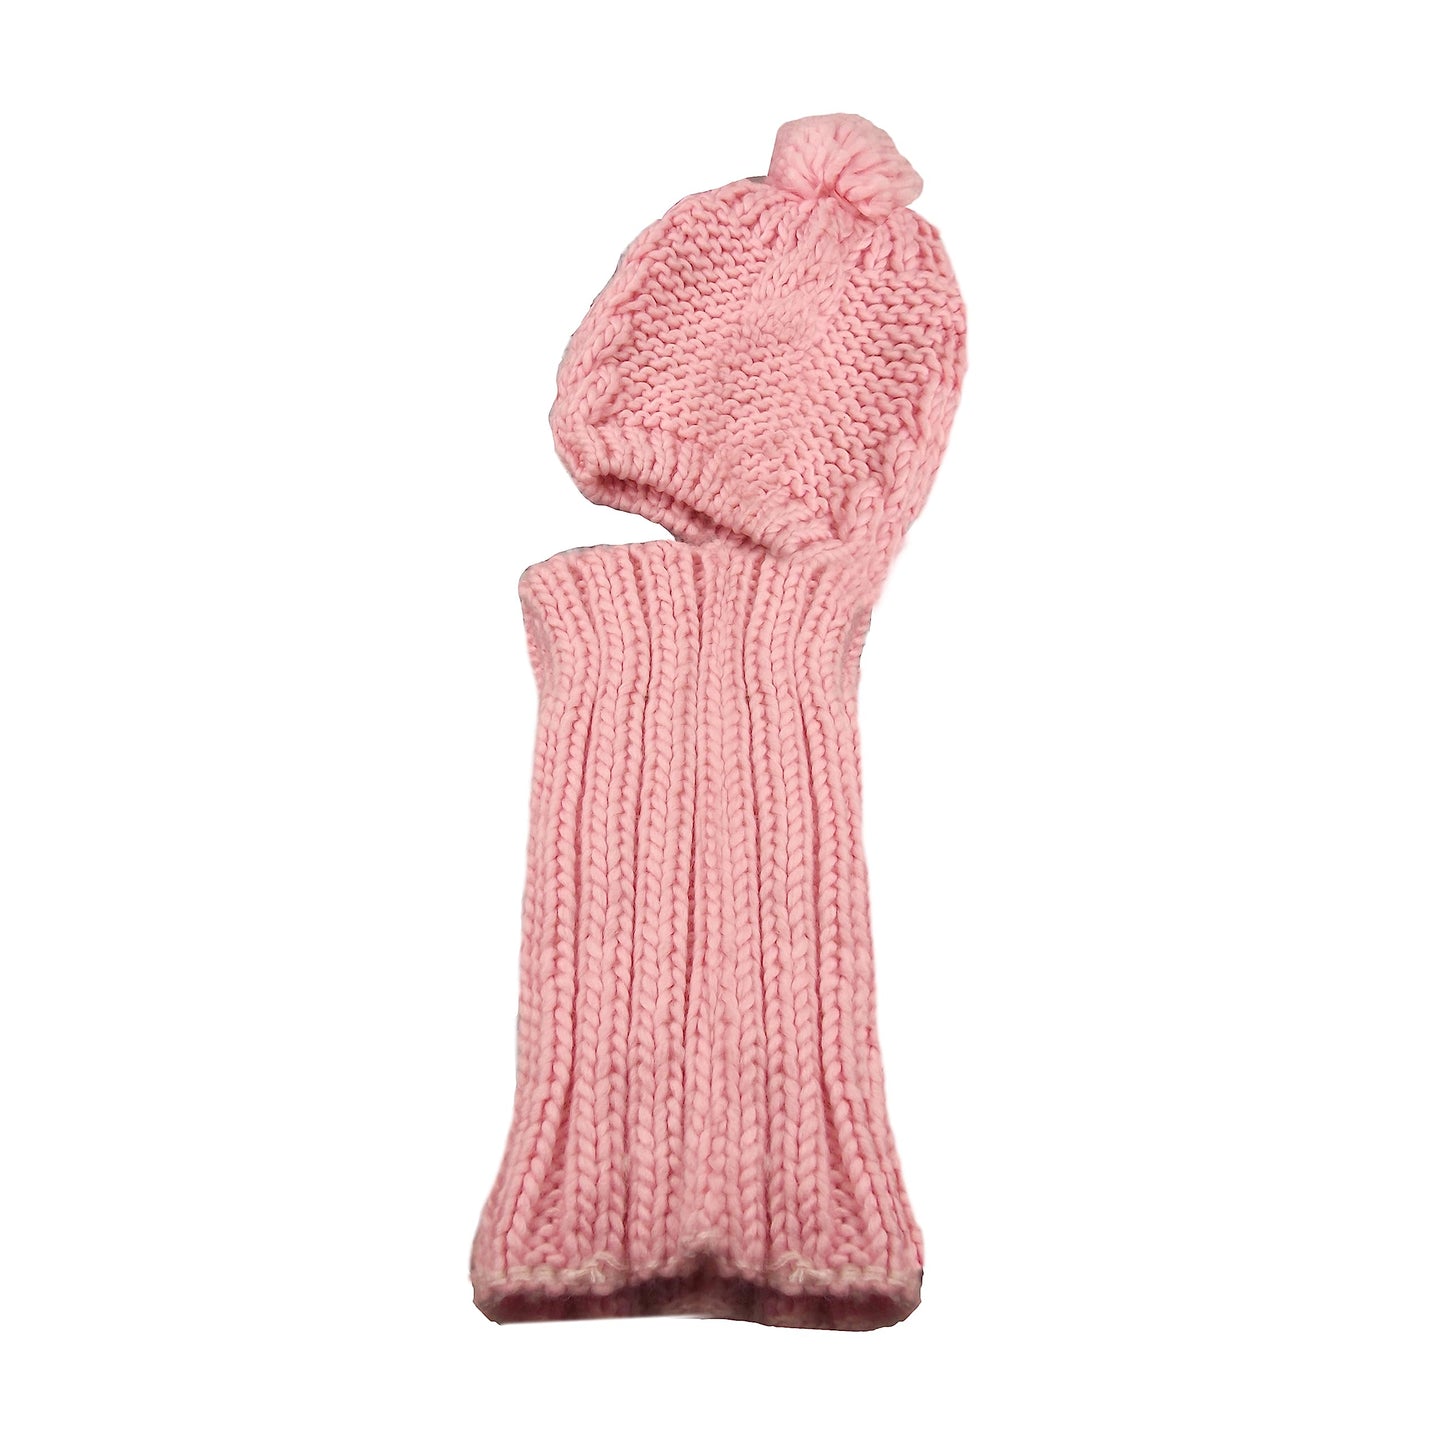 Women's Cable Knit Design & Snood 2 In 1 Thermal Beanie Hat Pom Pom. Buy now for £10.00. A Hats by Sock Stack. accessories, accessory, Beanie Hat, black, blush pink, Cable Knit, chunky, cream, dusky pink, fleece, grey, hat, Hats, head, hiking, hot pink, K